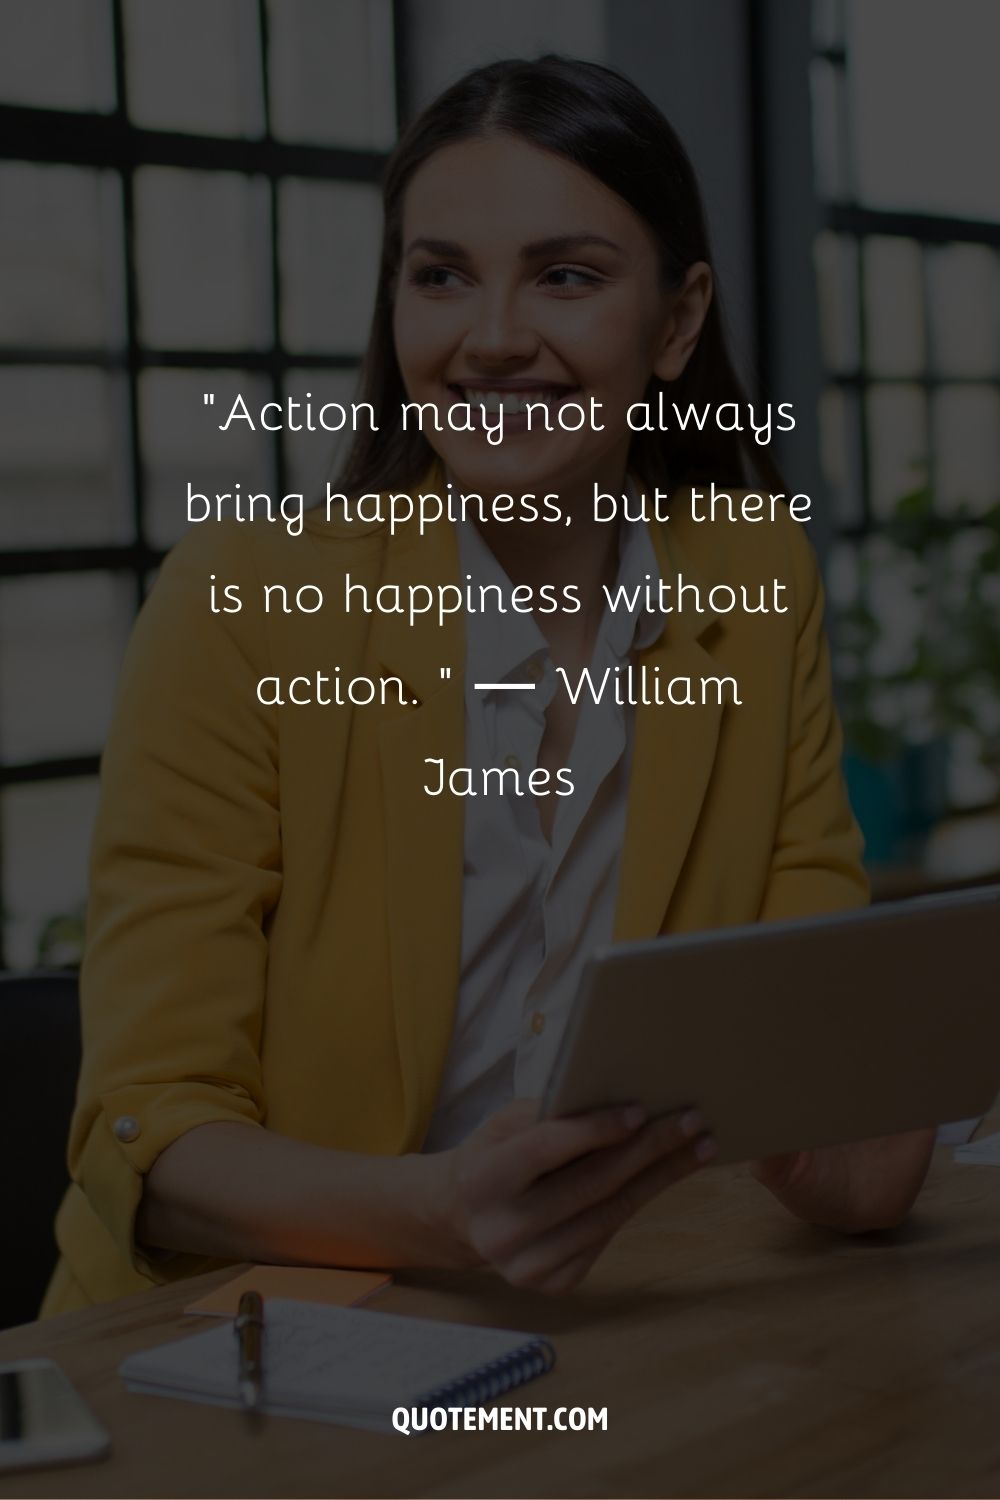 “Action may not always bring happiness, but there is no happiness without action. ” ― William James